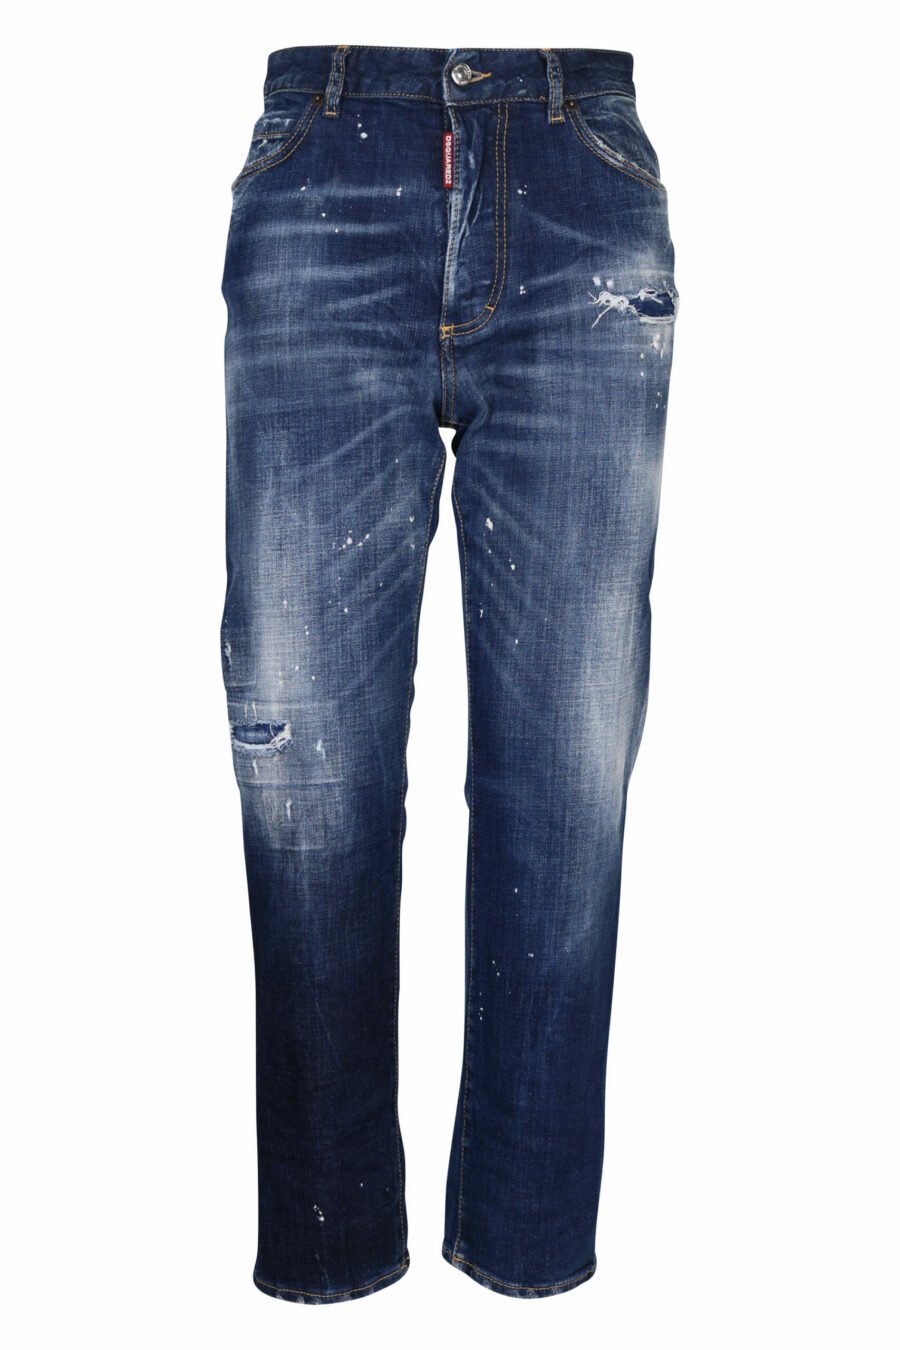 Blue "boston jean" jeans with rips - 8054148122256 scaled